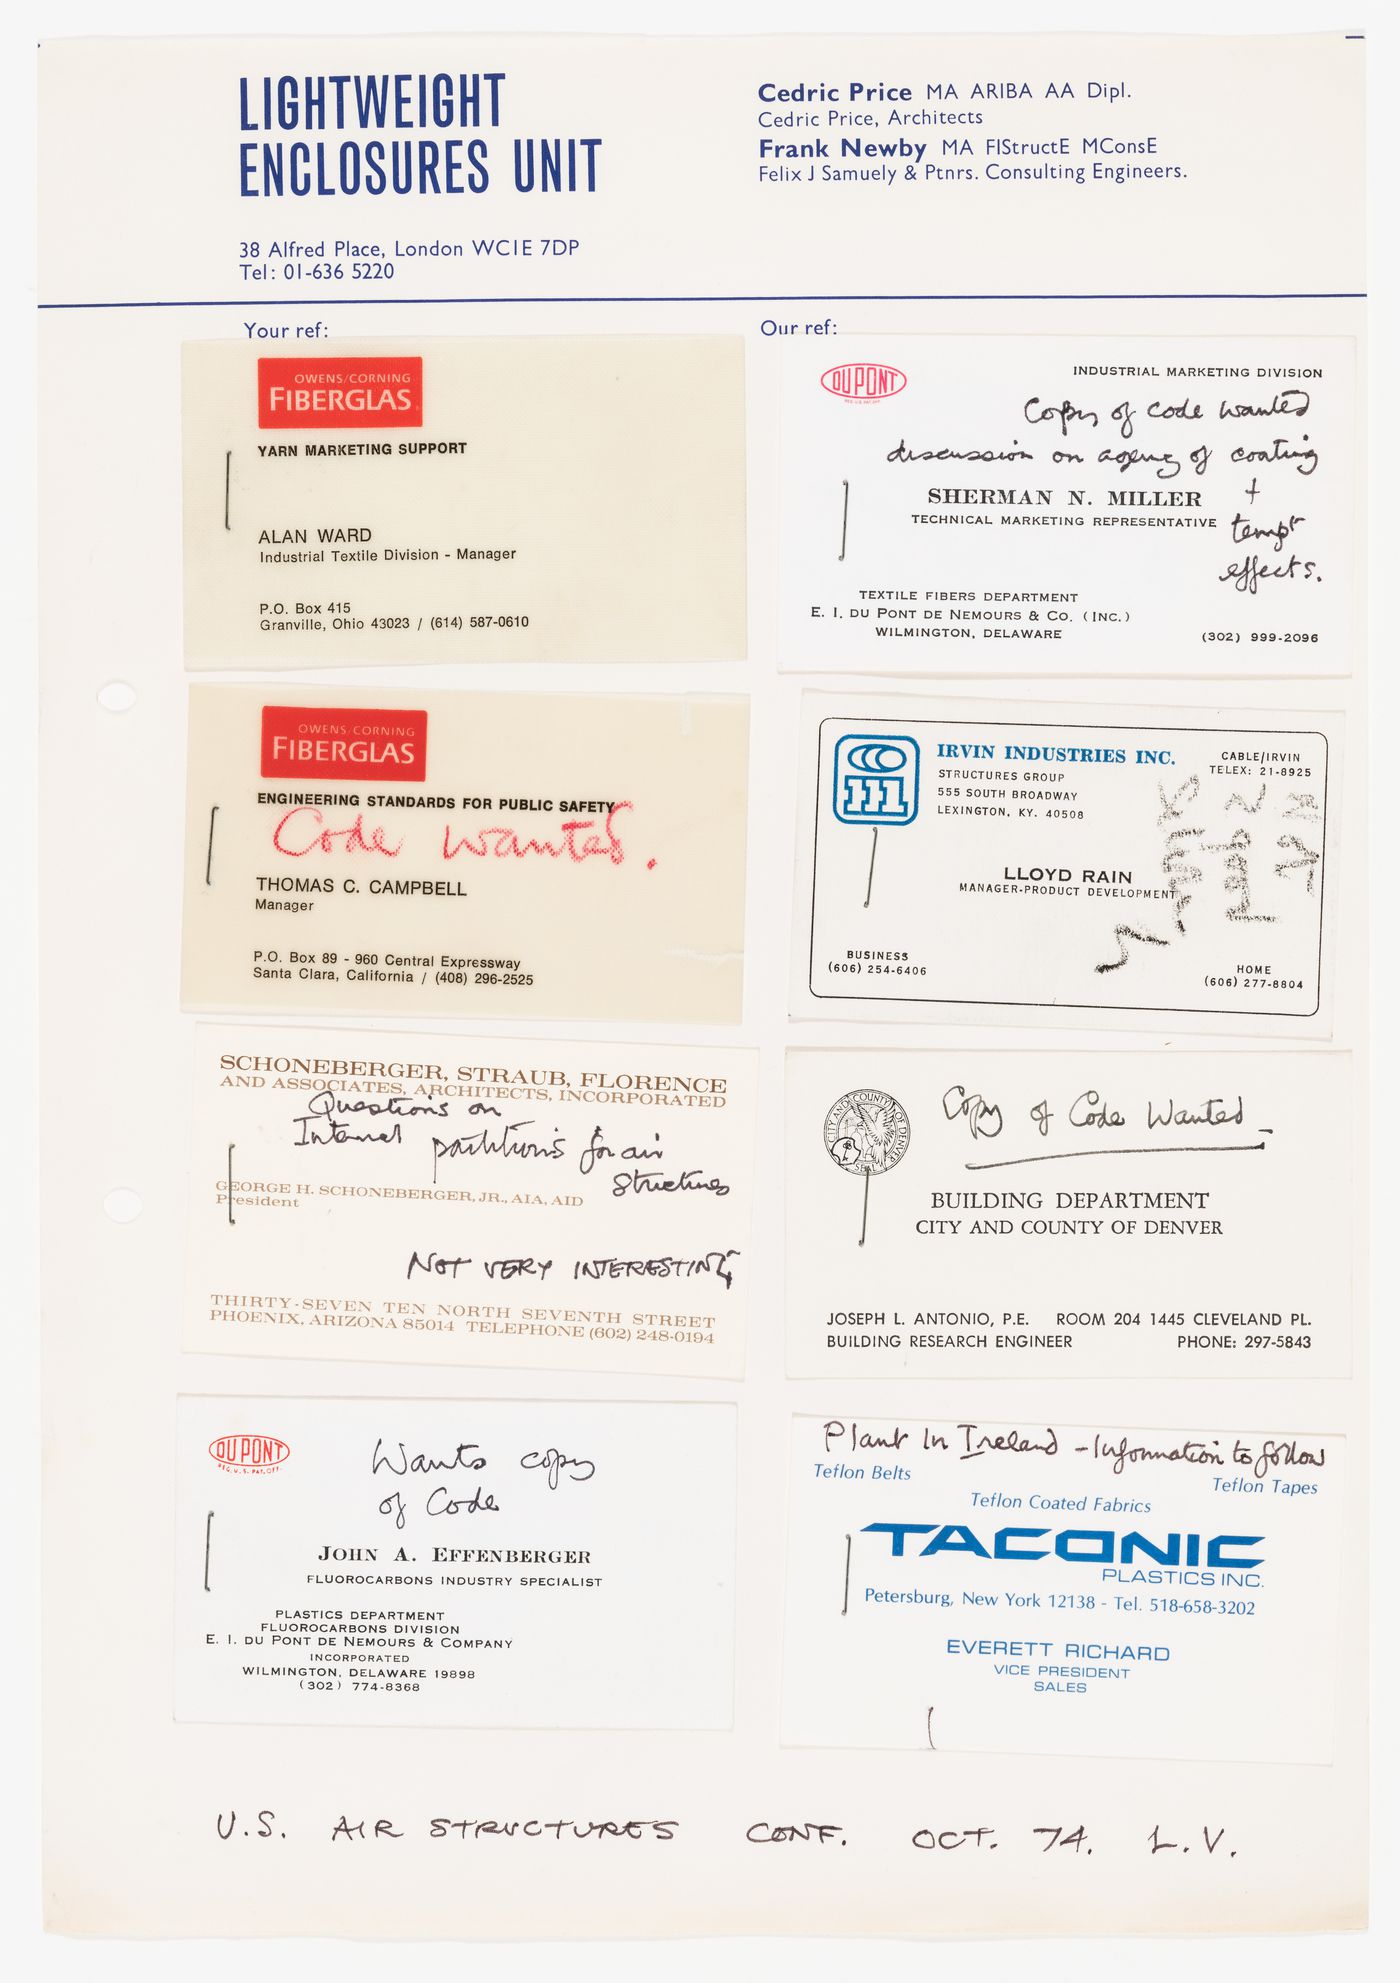 Department of the Environment (DOE) Air Structure project: business cards from a conference on air structures held in Las Vegas, Nevada, in 1974